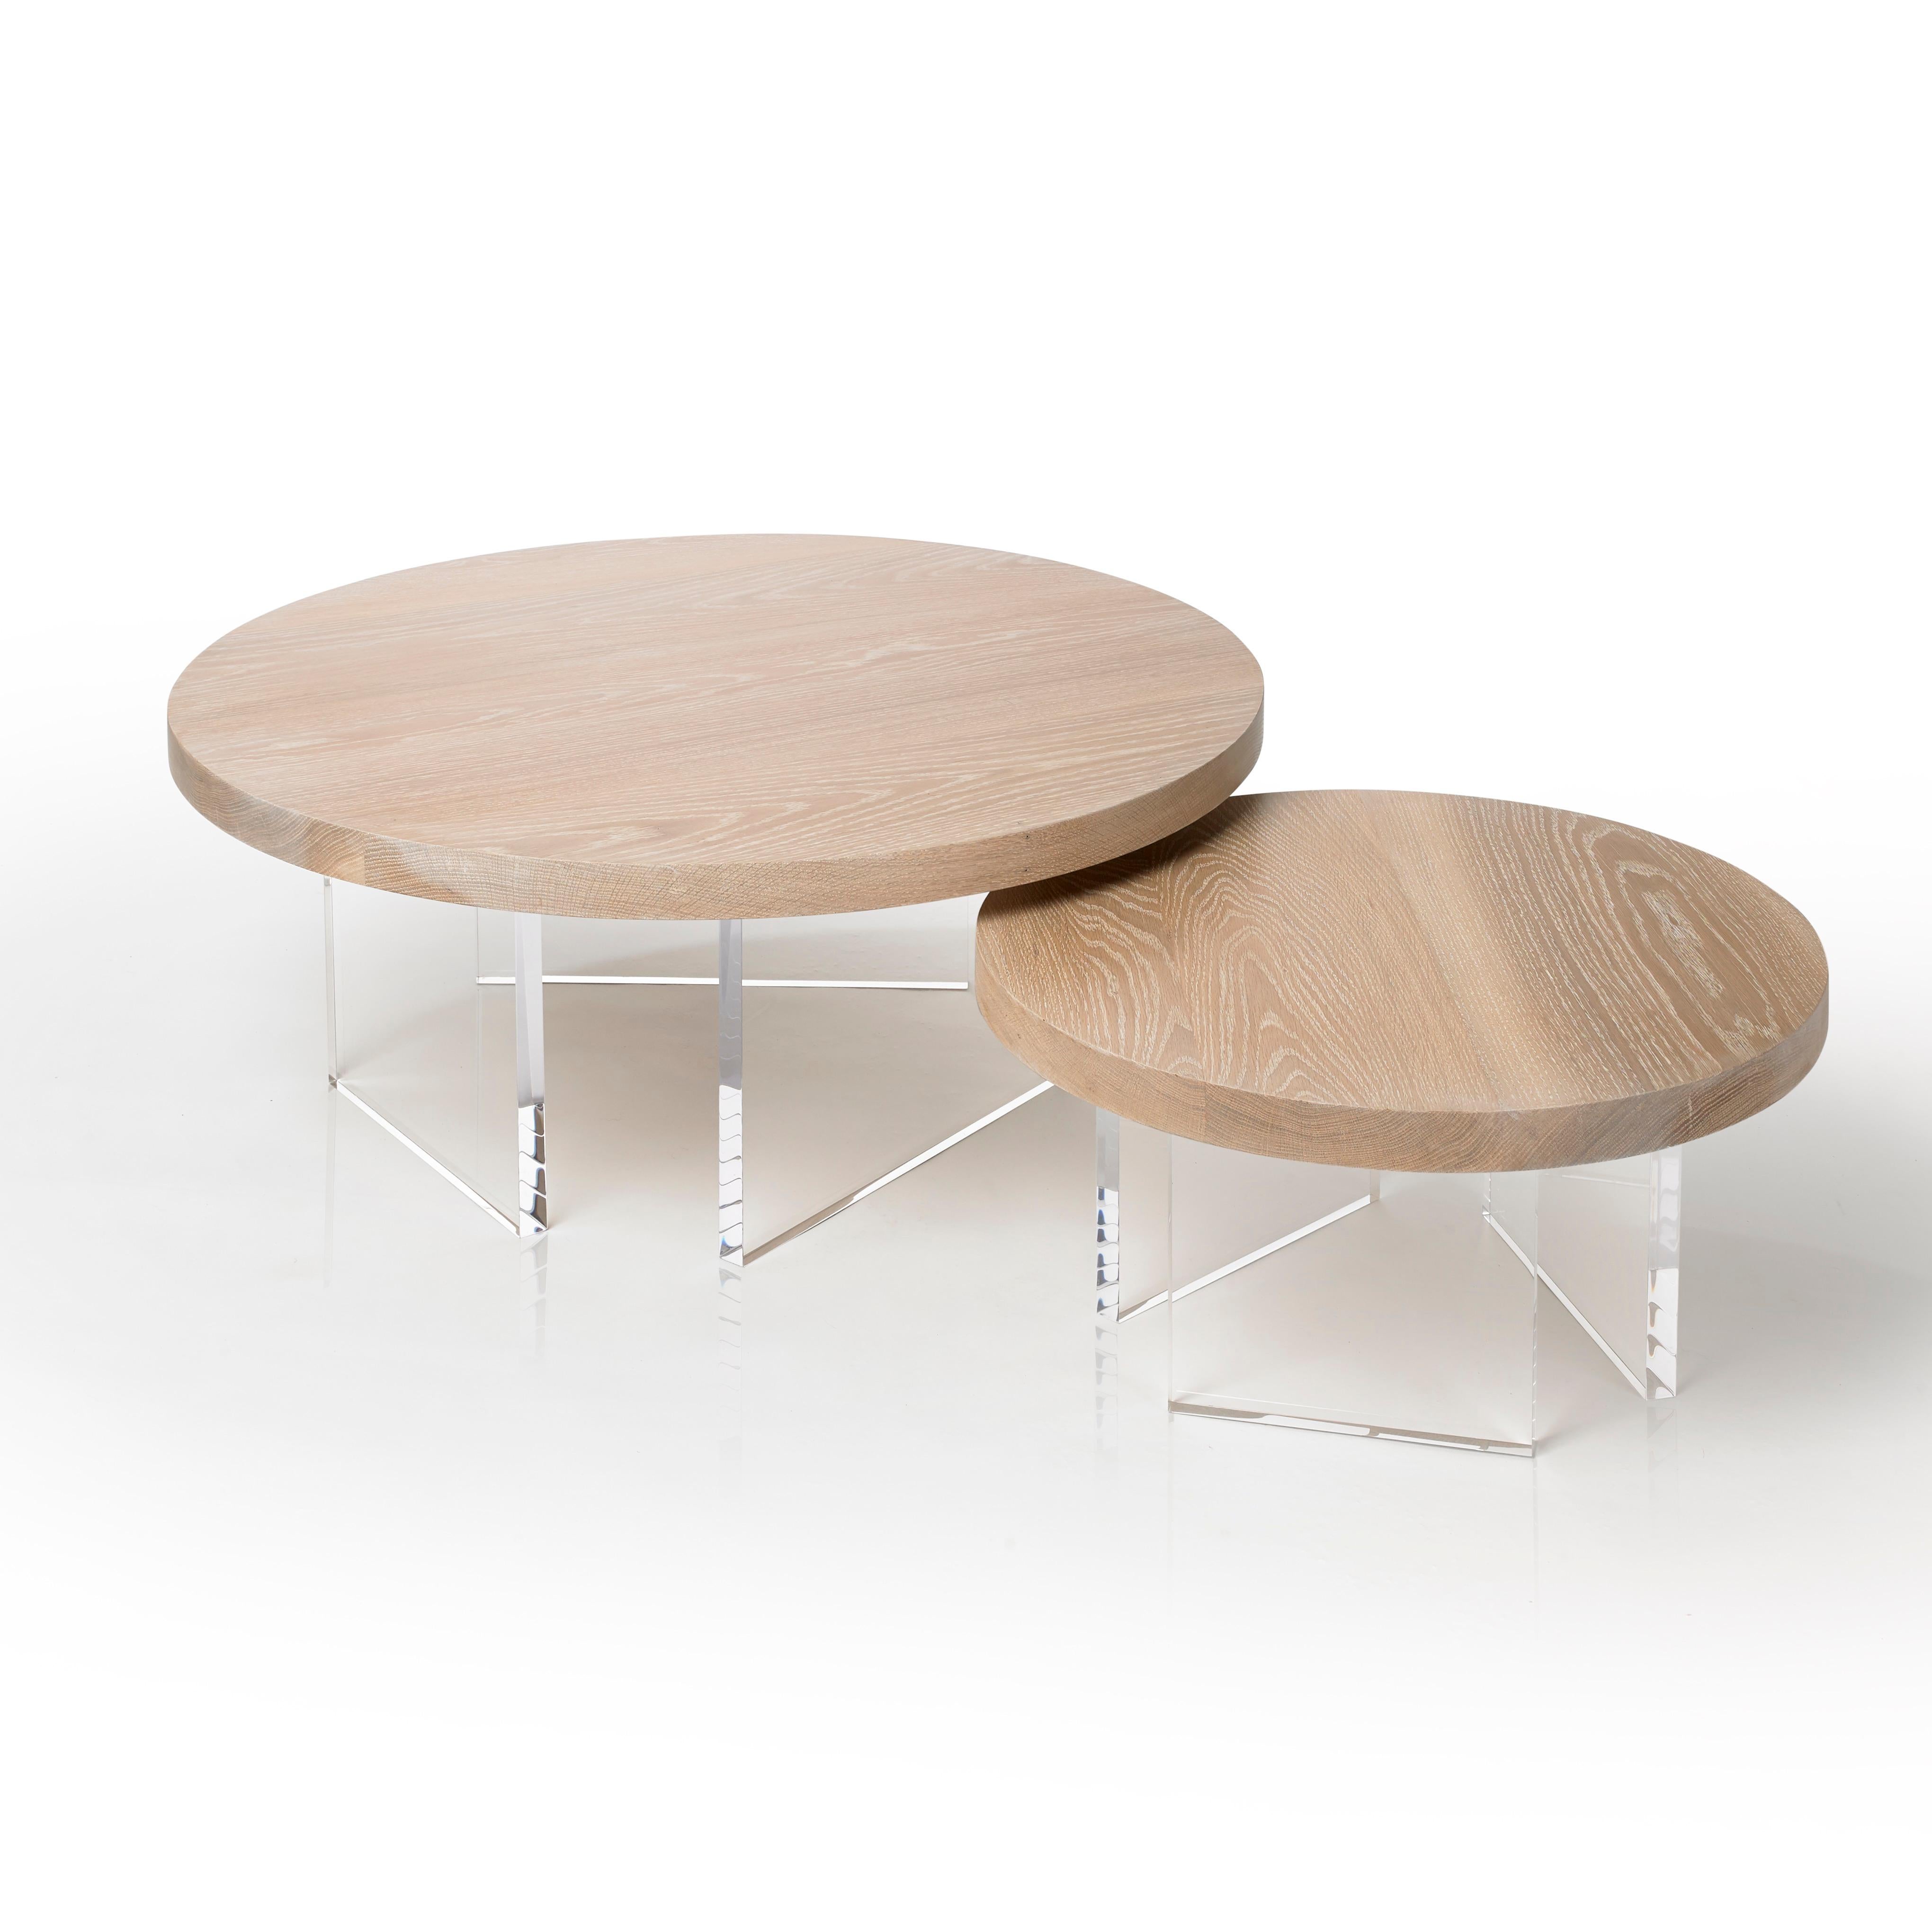 The Constantinople Round coffee table set is a modern wood and acrylic coffee table in White Oak that provides a warm feel with a touch of brilliance. The tabletop sits on three acrylic one-inch thick legs that allow light to pass through for an